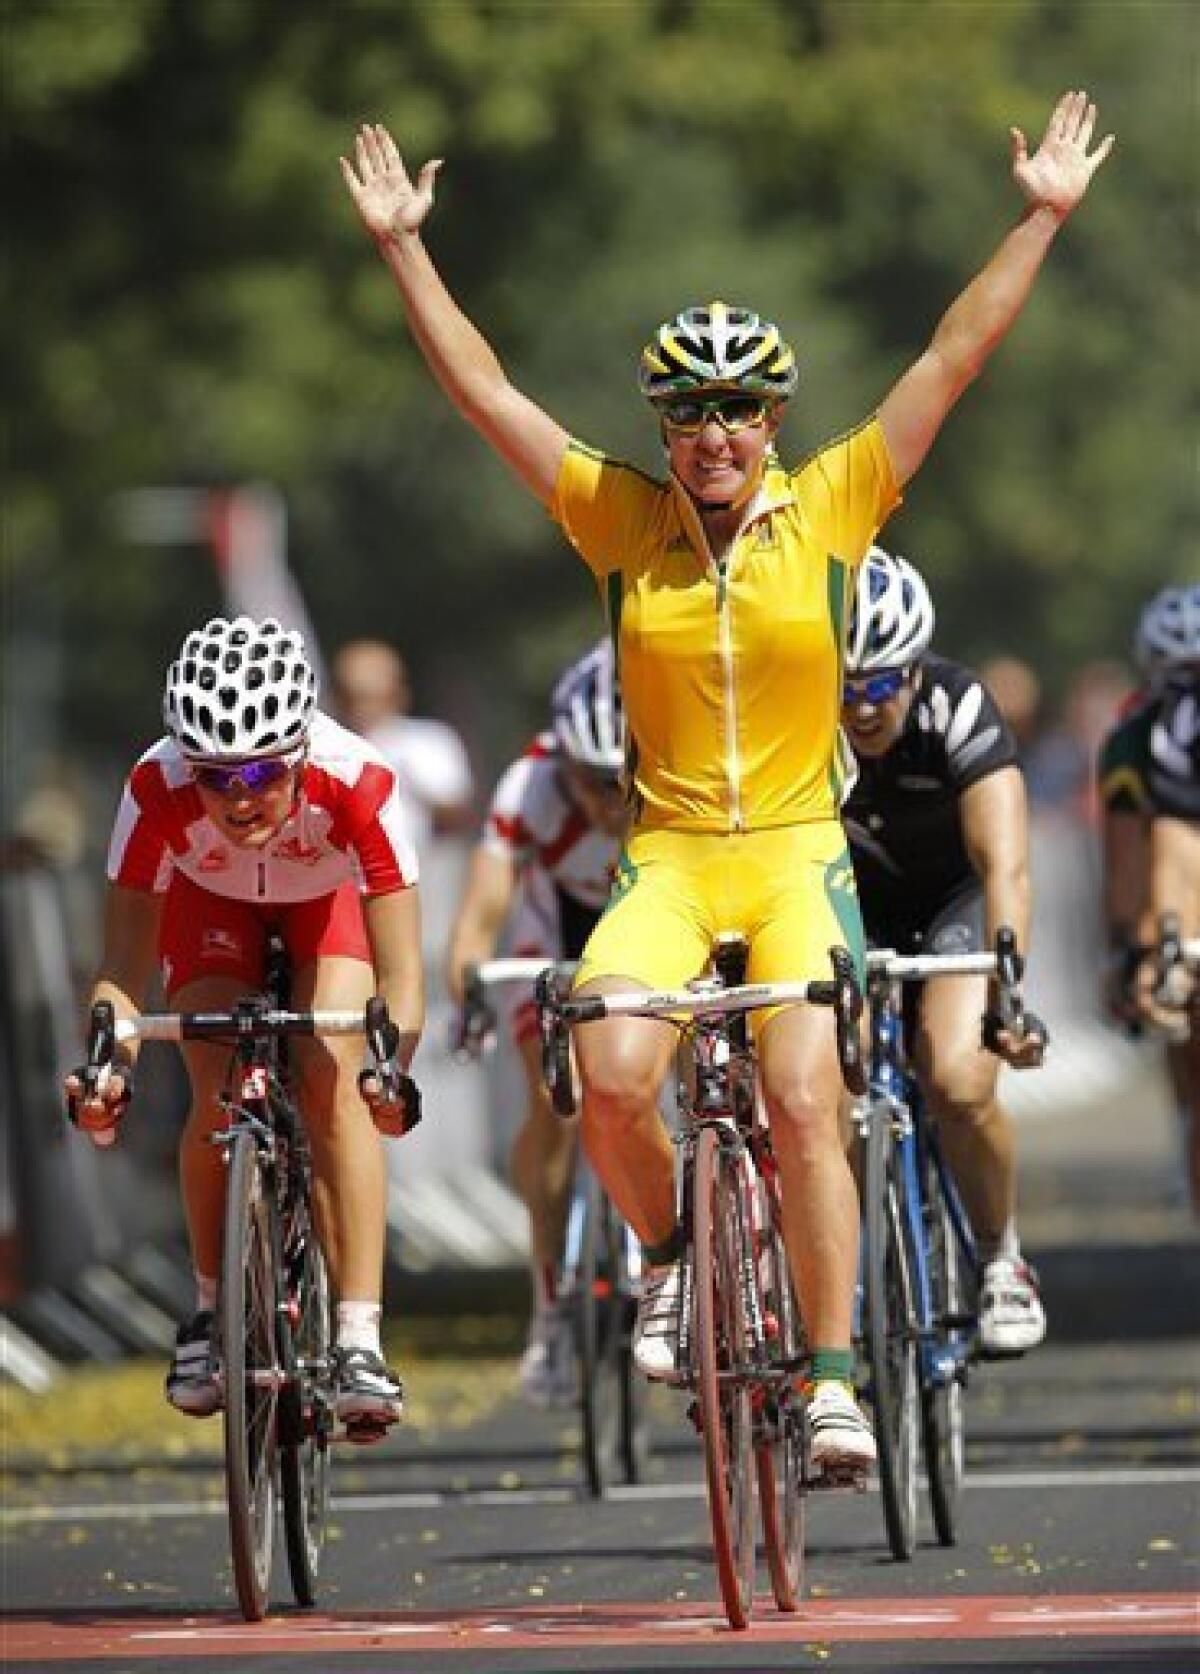 Australia's Rochelle Gilmore, right, celebrates as she crosses the finish line, followed by England's Elizabeth Armitstead, left, to win the women's 112km cycling road race during the Commonwealth Games in New Delhi, India, Sunday, Oct. 10, 2010. (AP Photo/Victor R. Caivano)